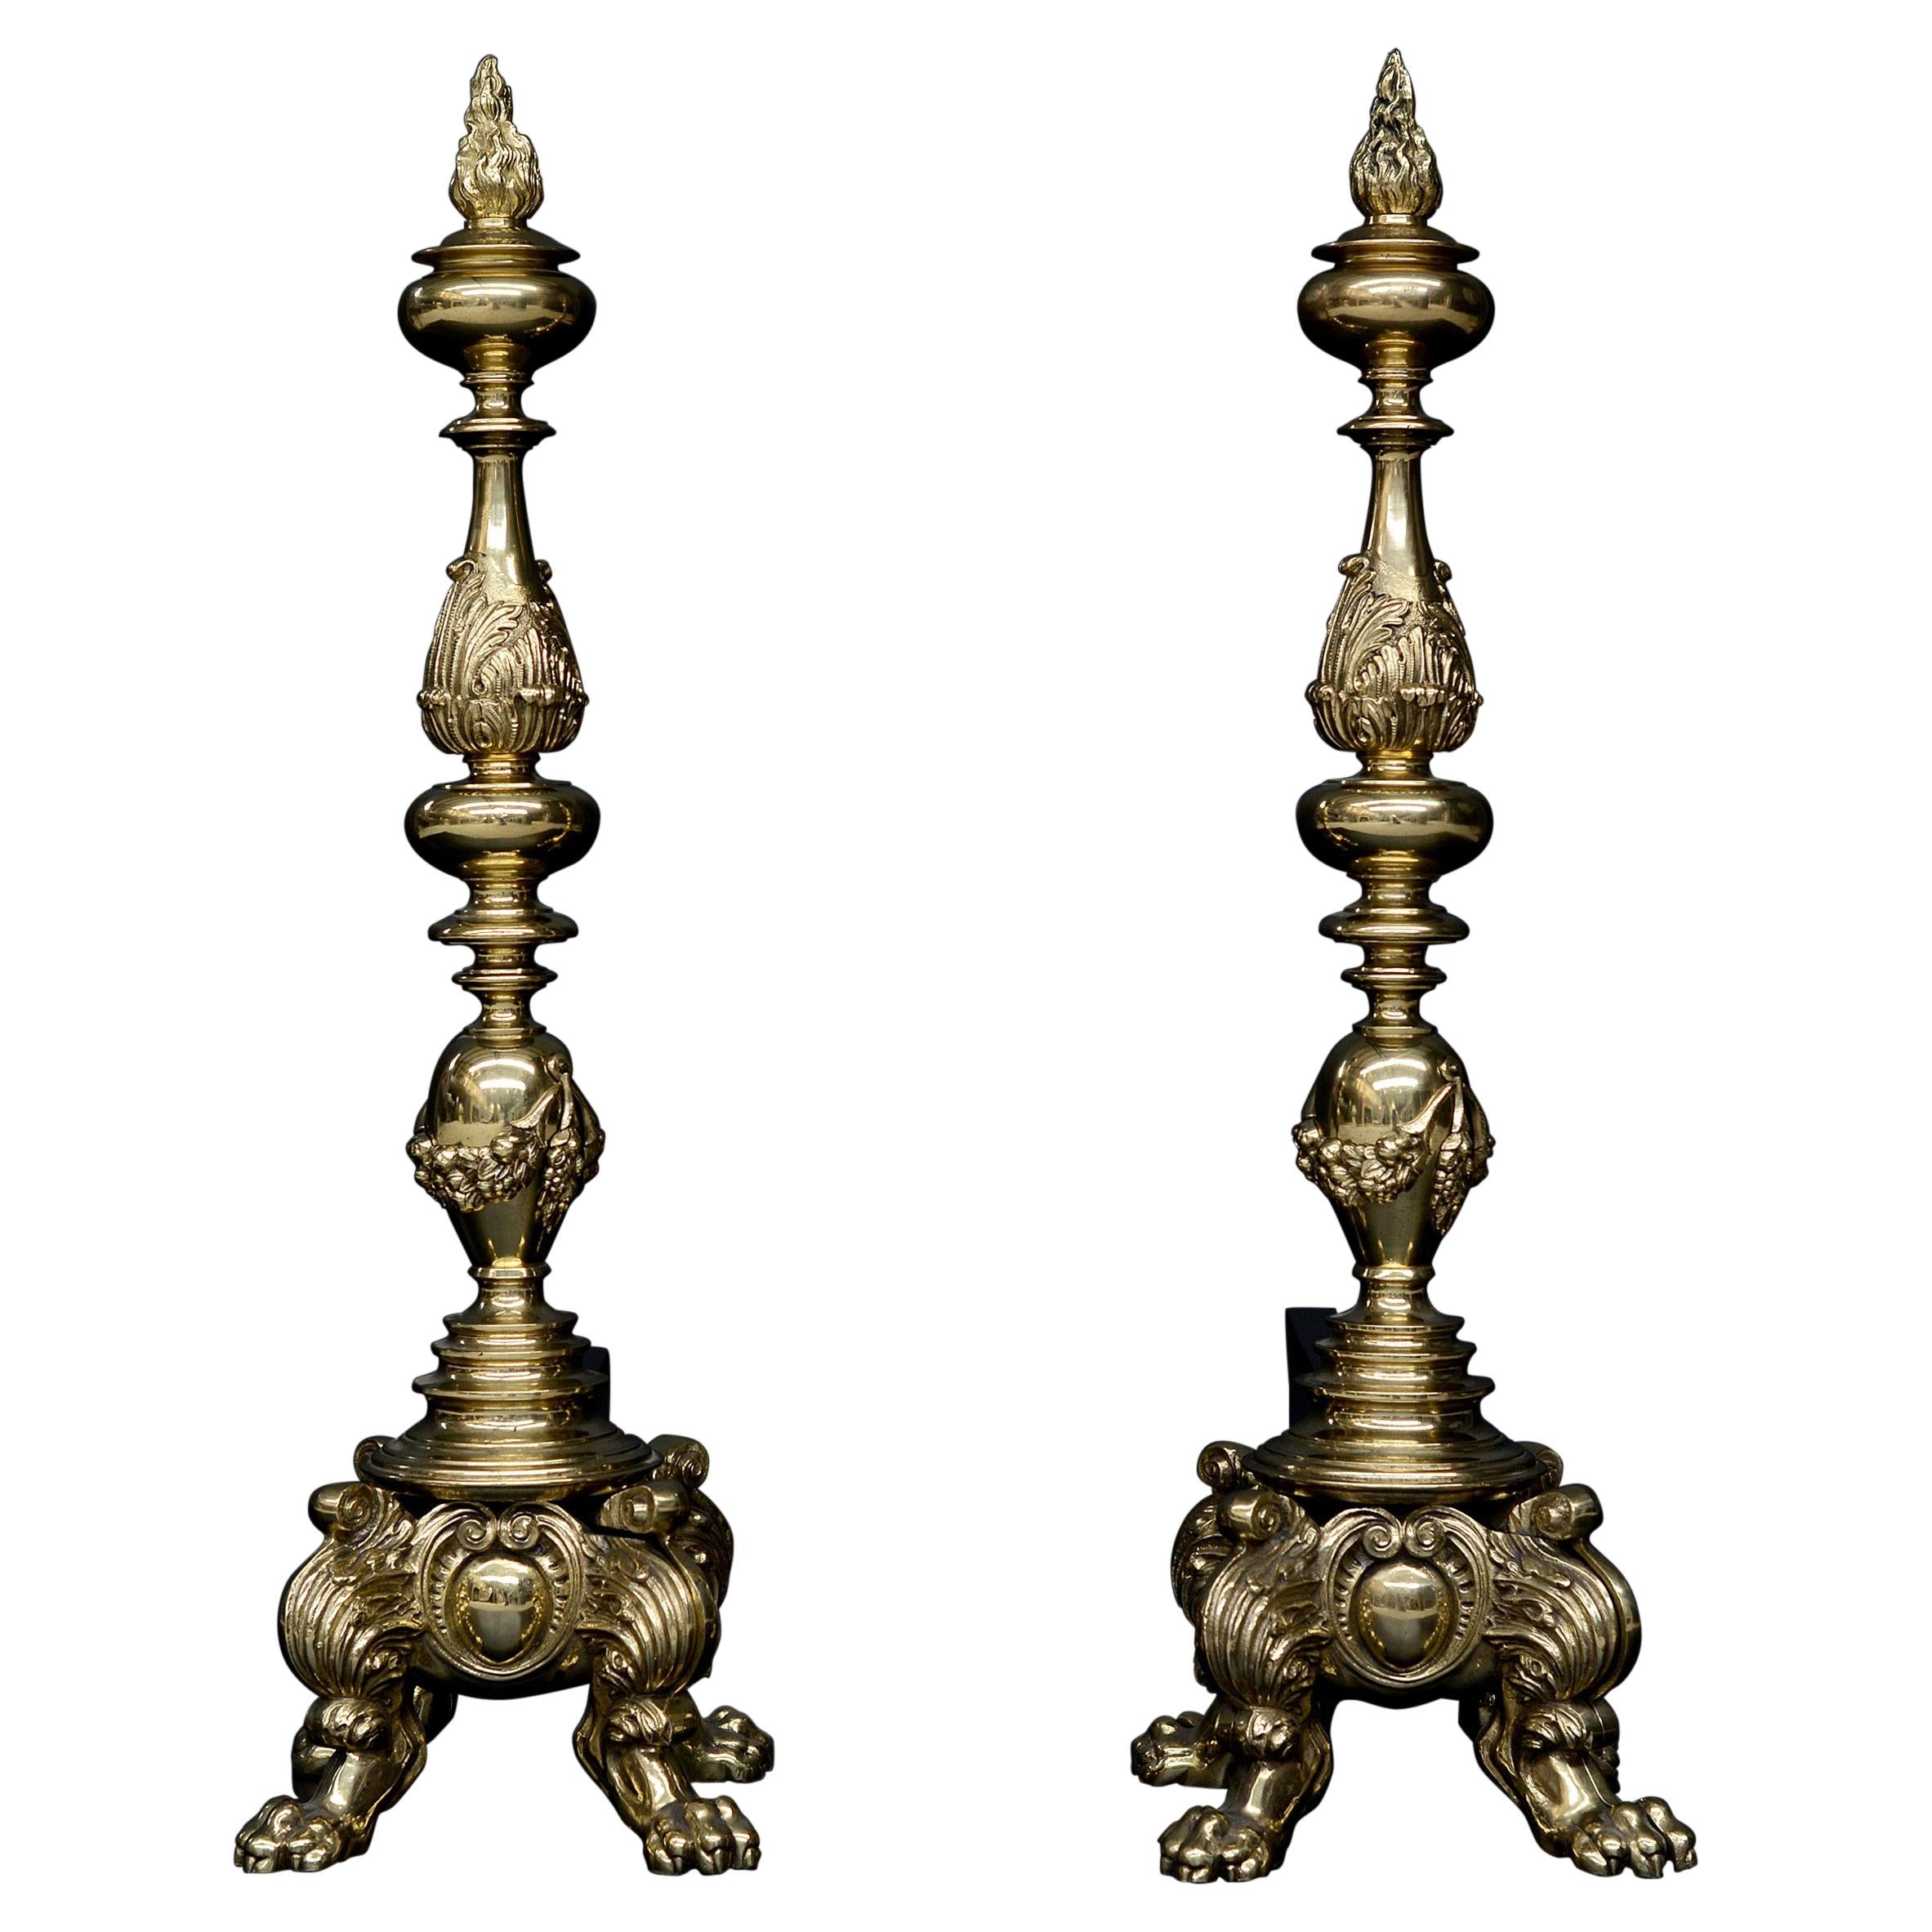 Large Pair of Ornate Brass Firedogs